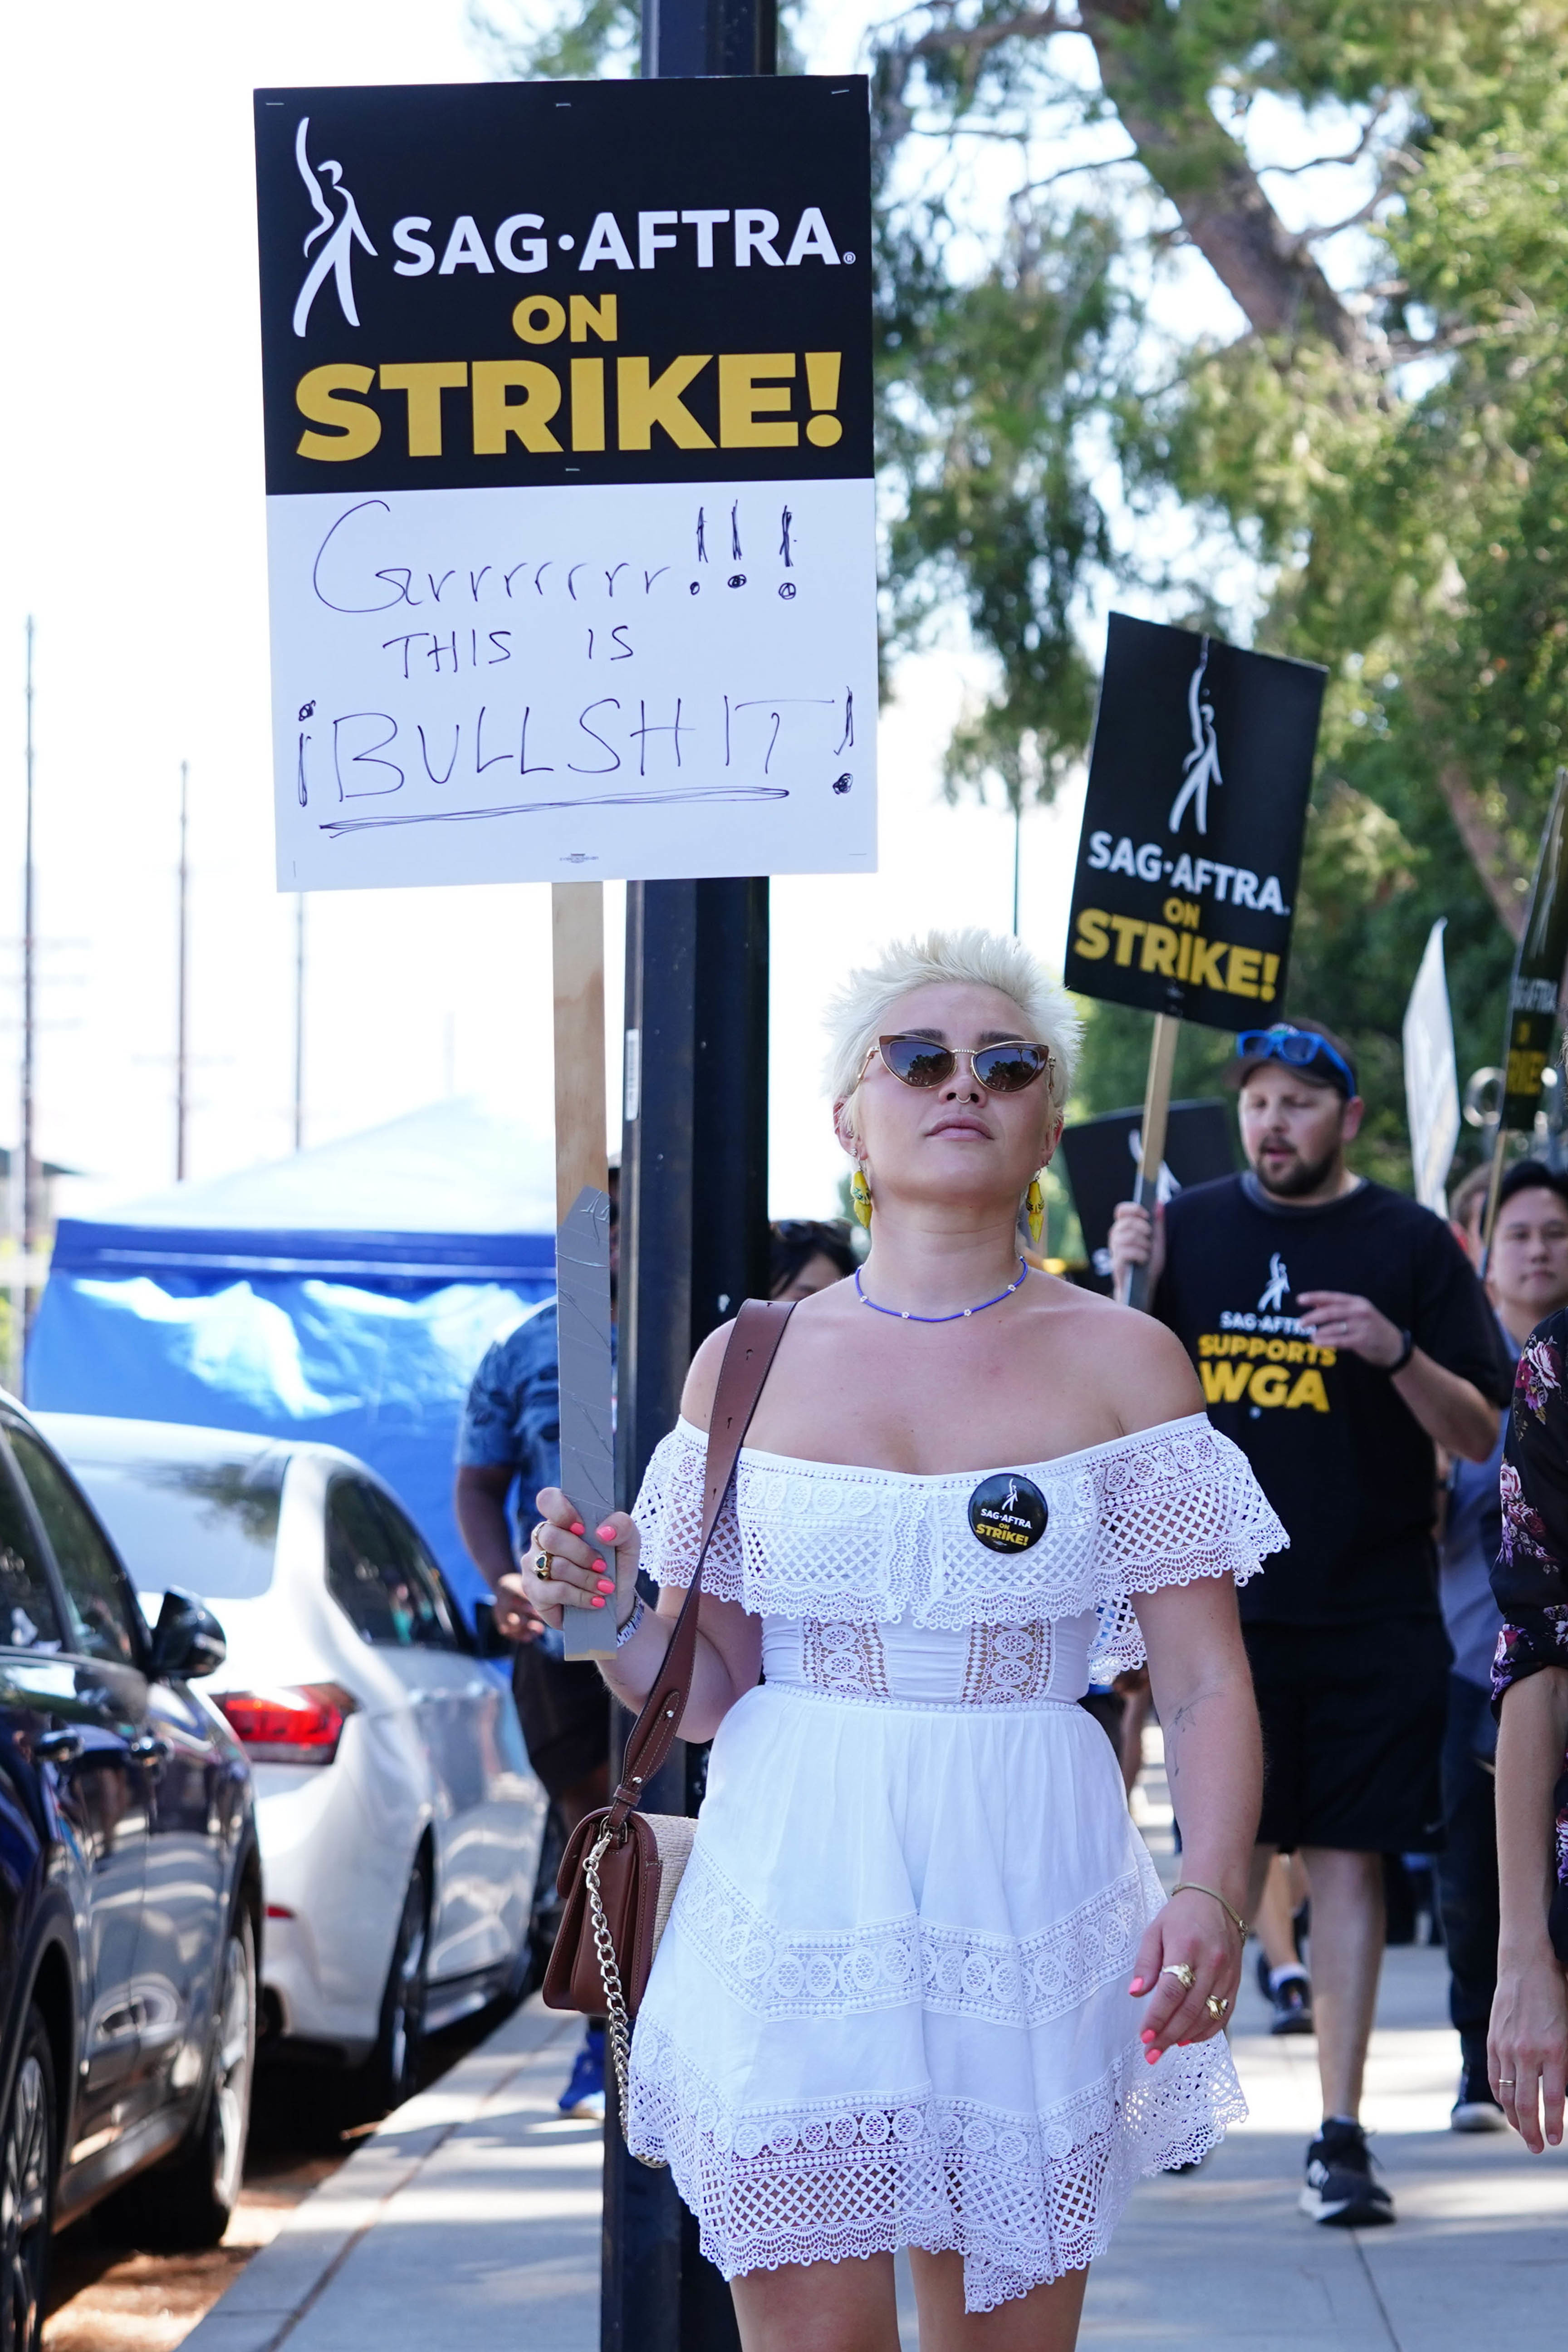 Florence holding her sign at the picket line